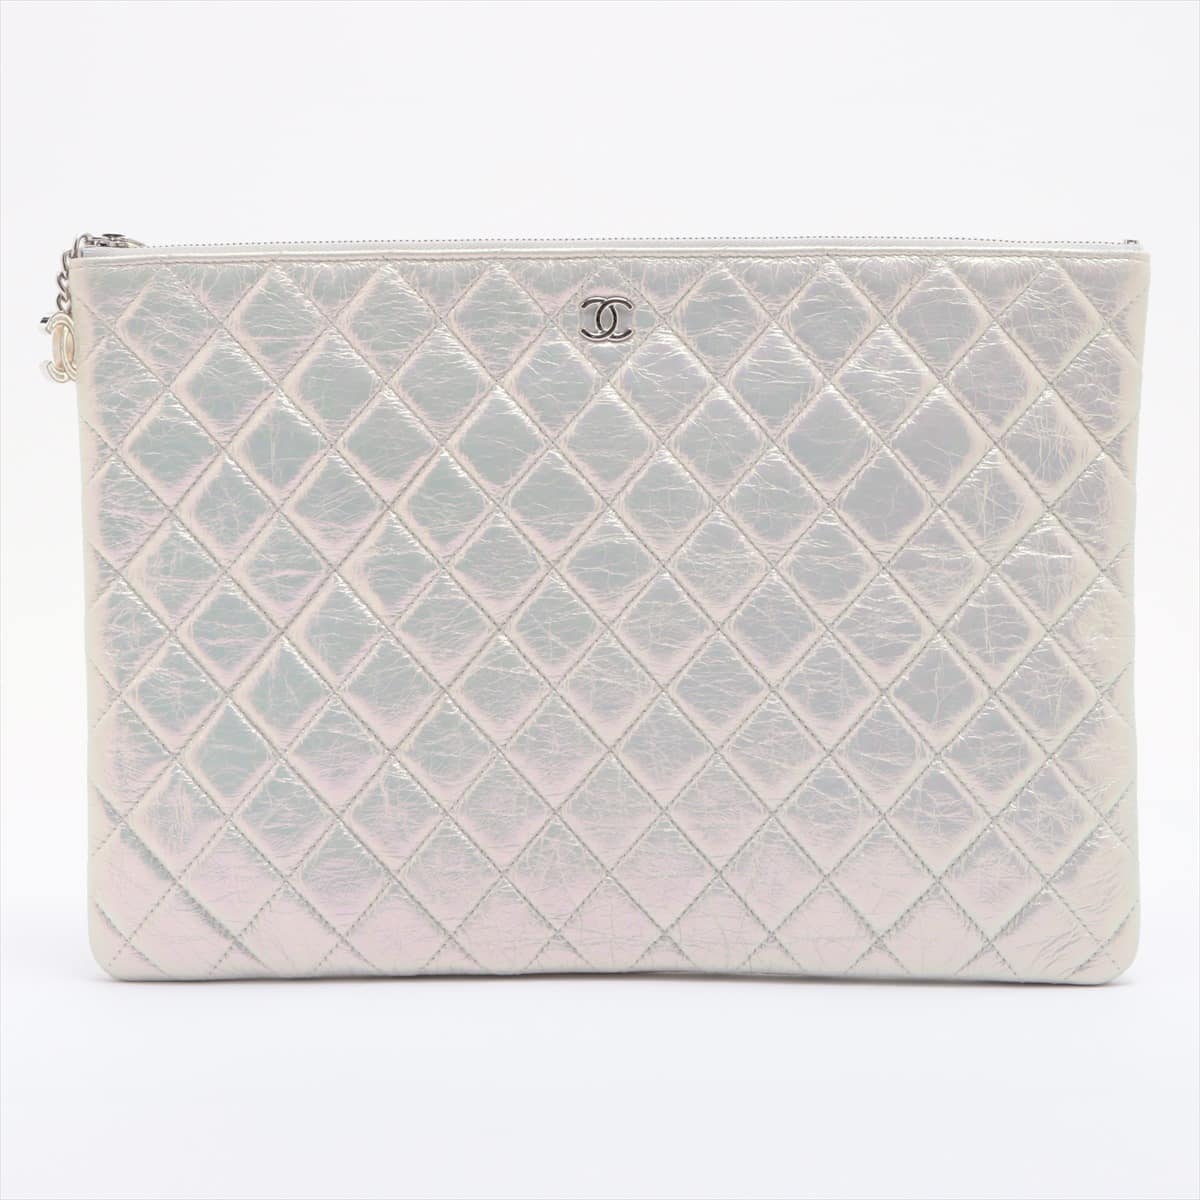 Chanel Matelasse Leather Clutch bag Aurora Silver Metal fittings 27th